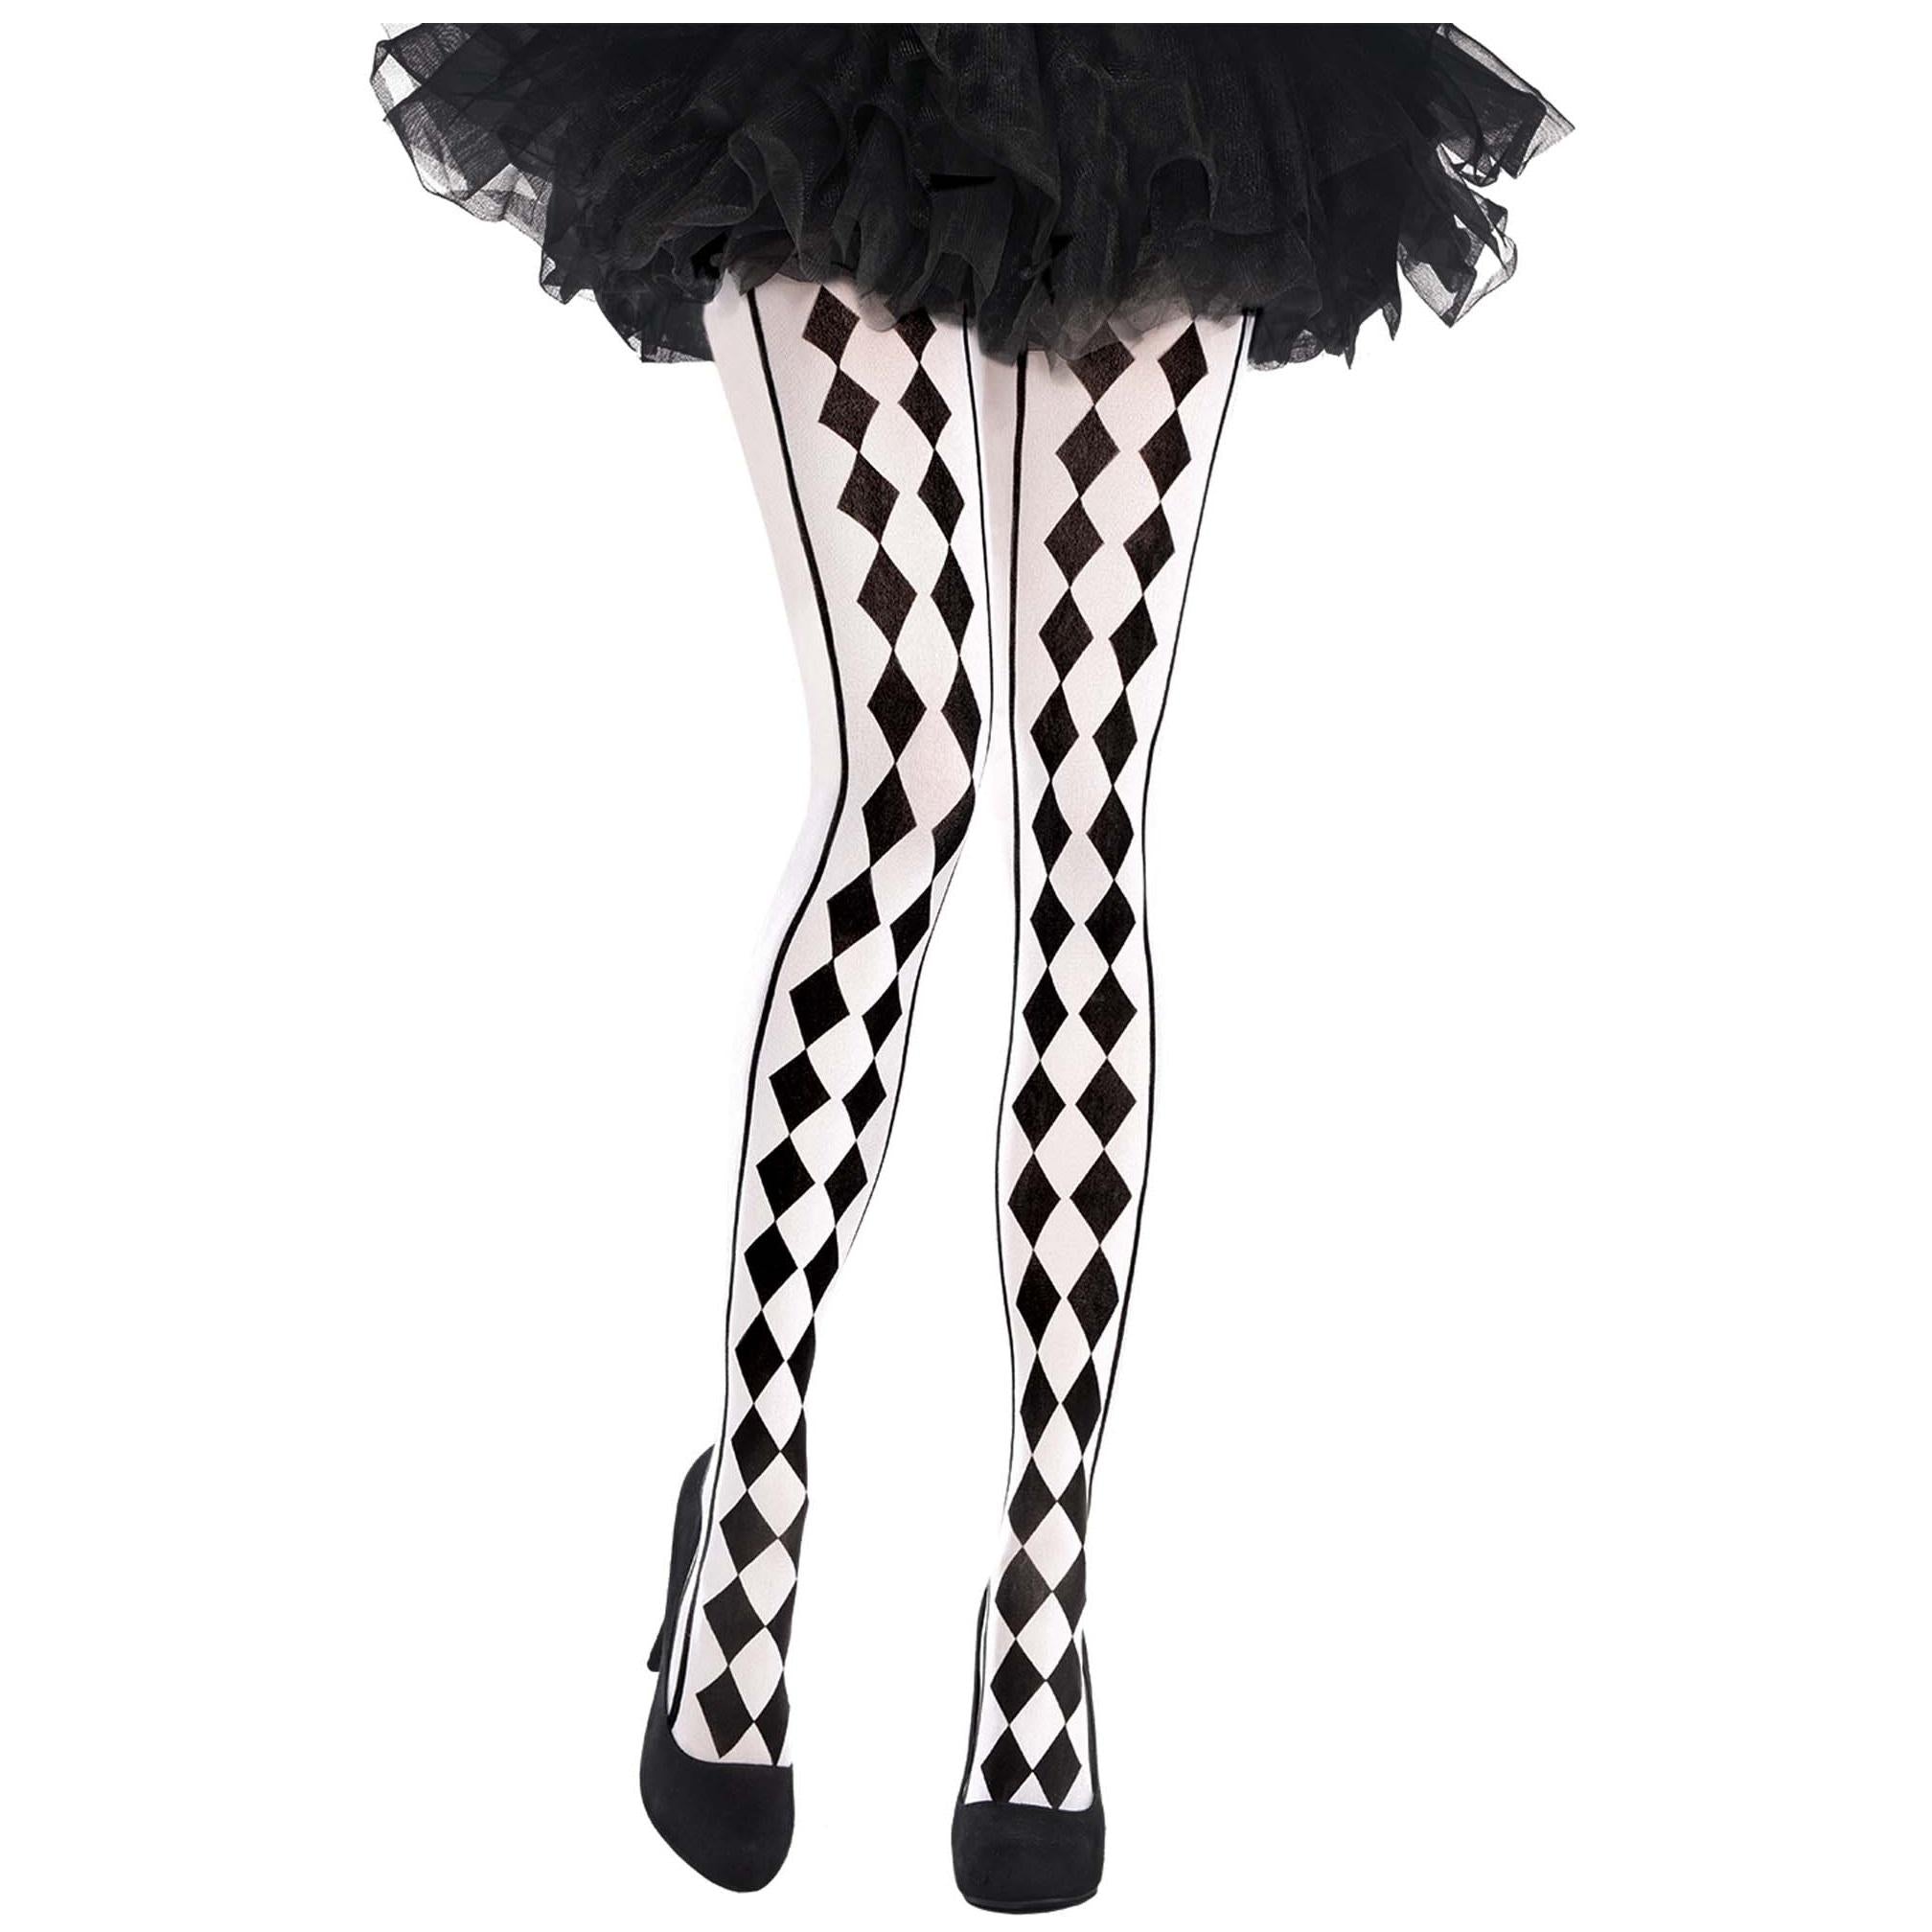 Adult Harlequin Tights Costumes & Apparel - Party Centre